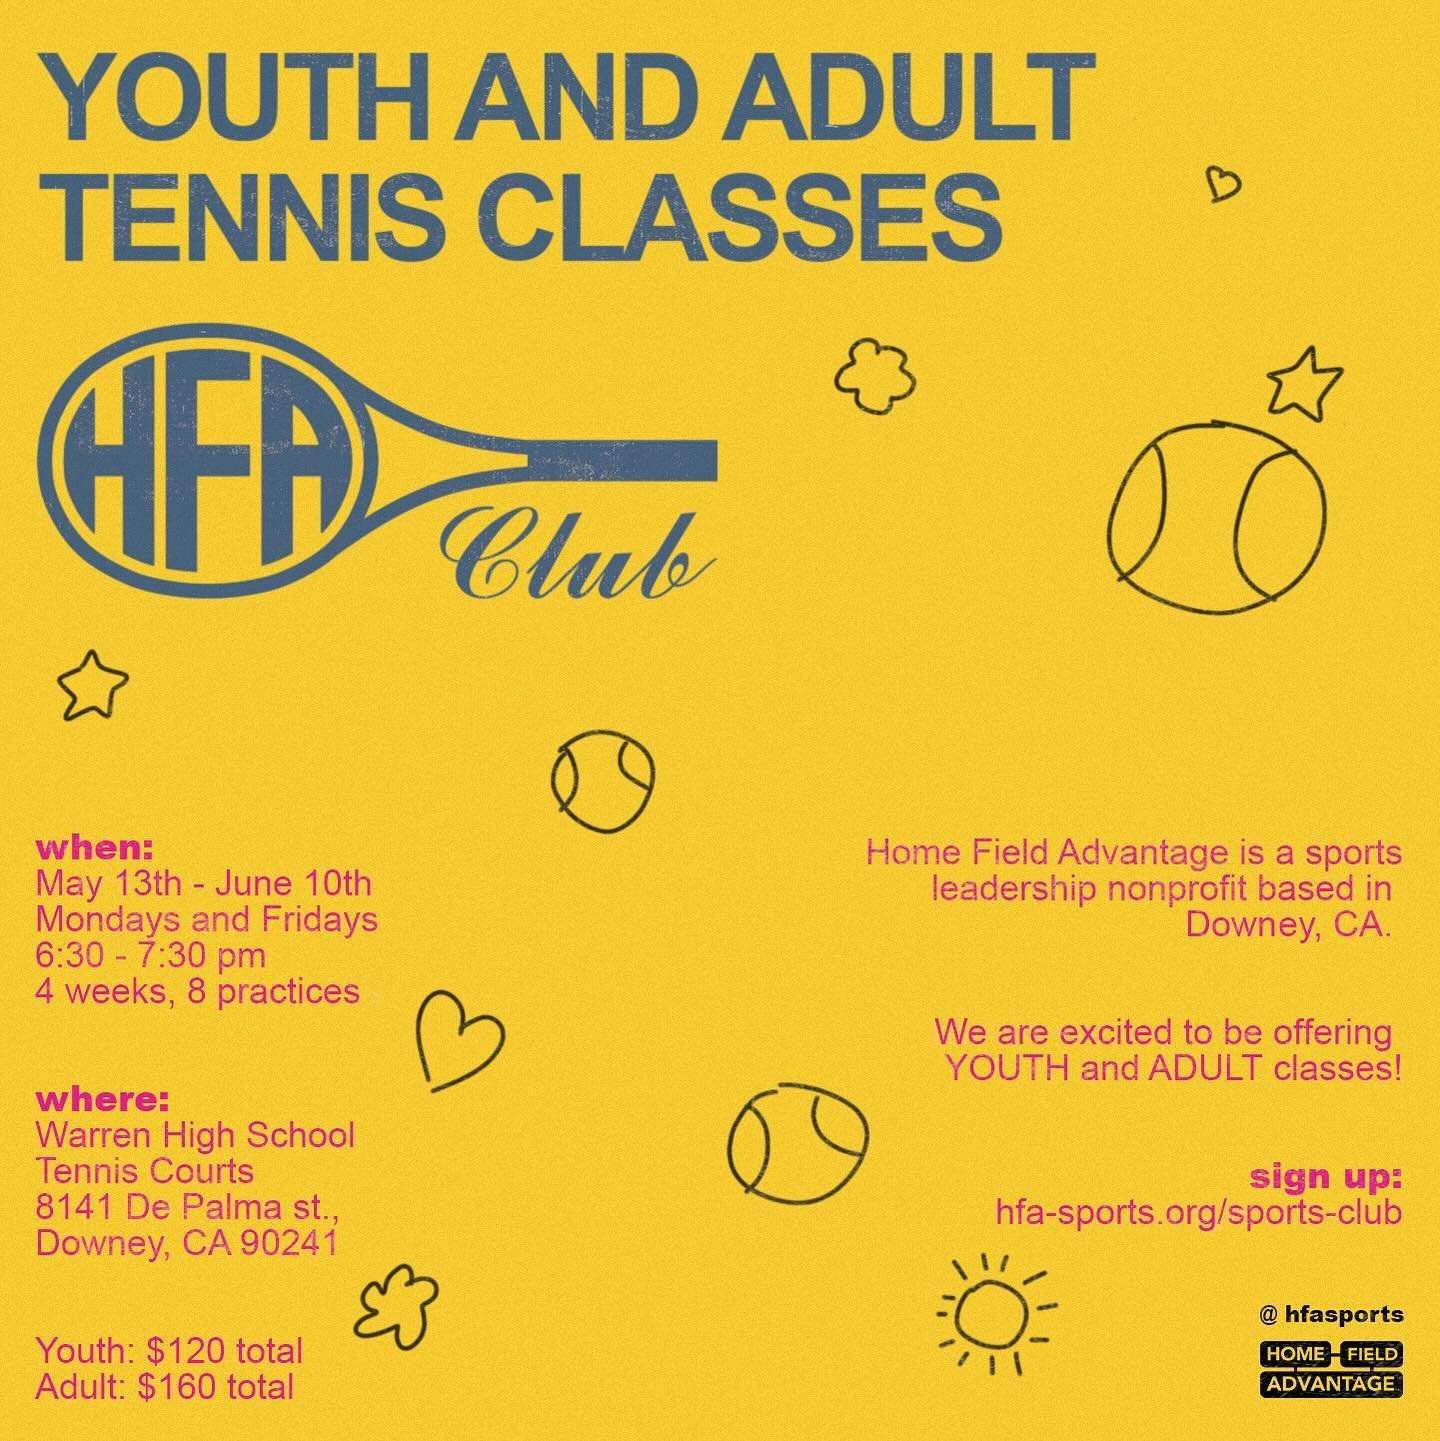 It&rsquo;s the summer of tennis 🤩🎾🎀🌞

Come train with the HFA Downey Tennis Club! We are super excited to be providing recreational Youth &amp; Adult Tennis Lessons at Warren High School! 🎾

4 weeks! 8 practices! 
May 13th - June 10th 
Mondays a